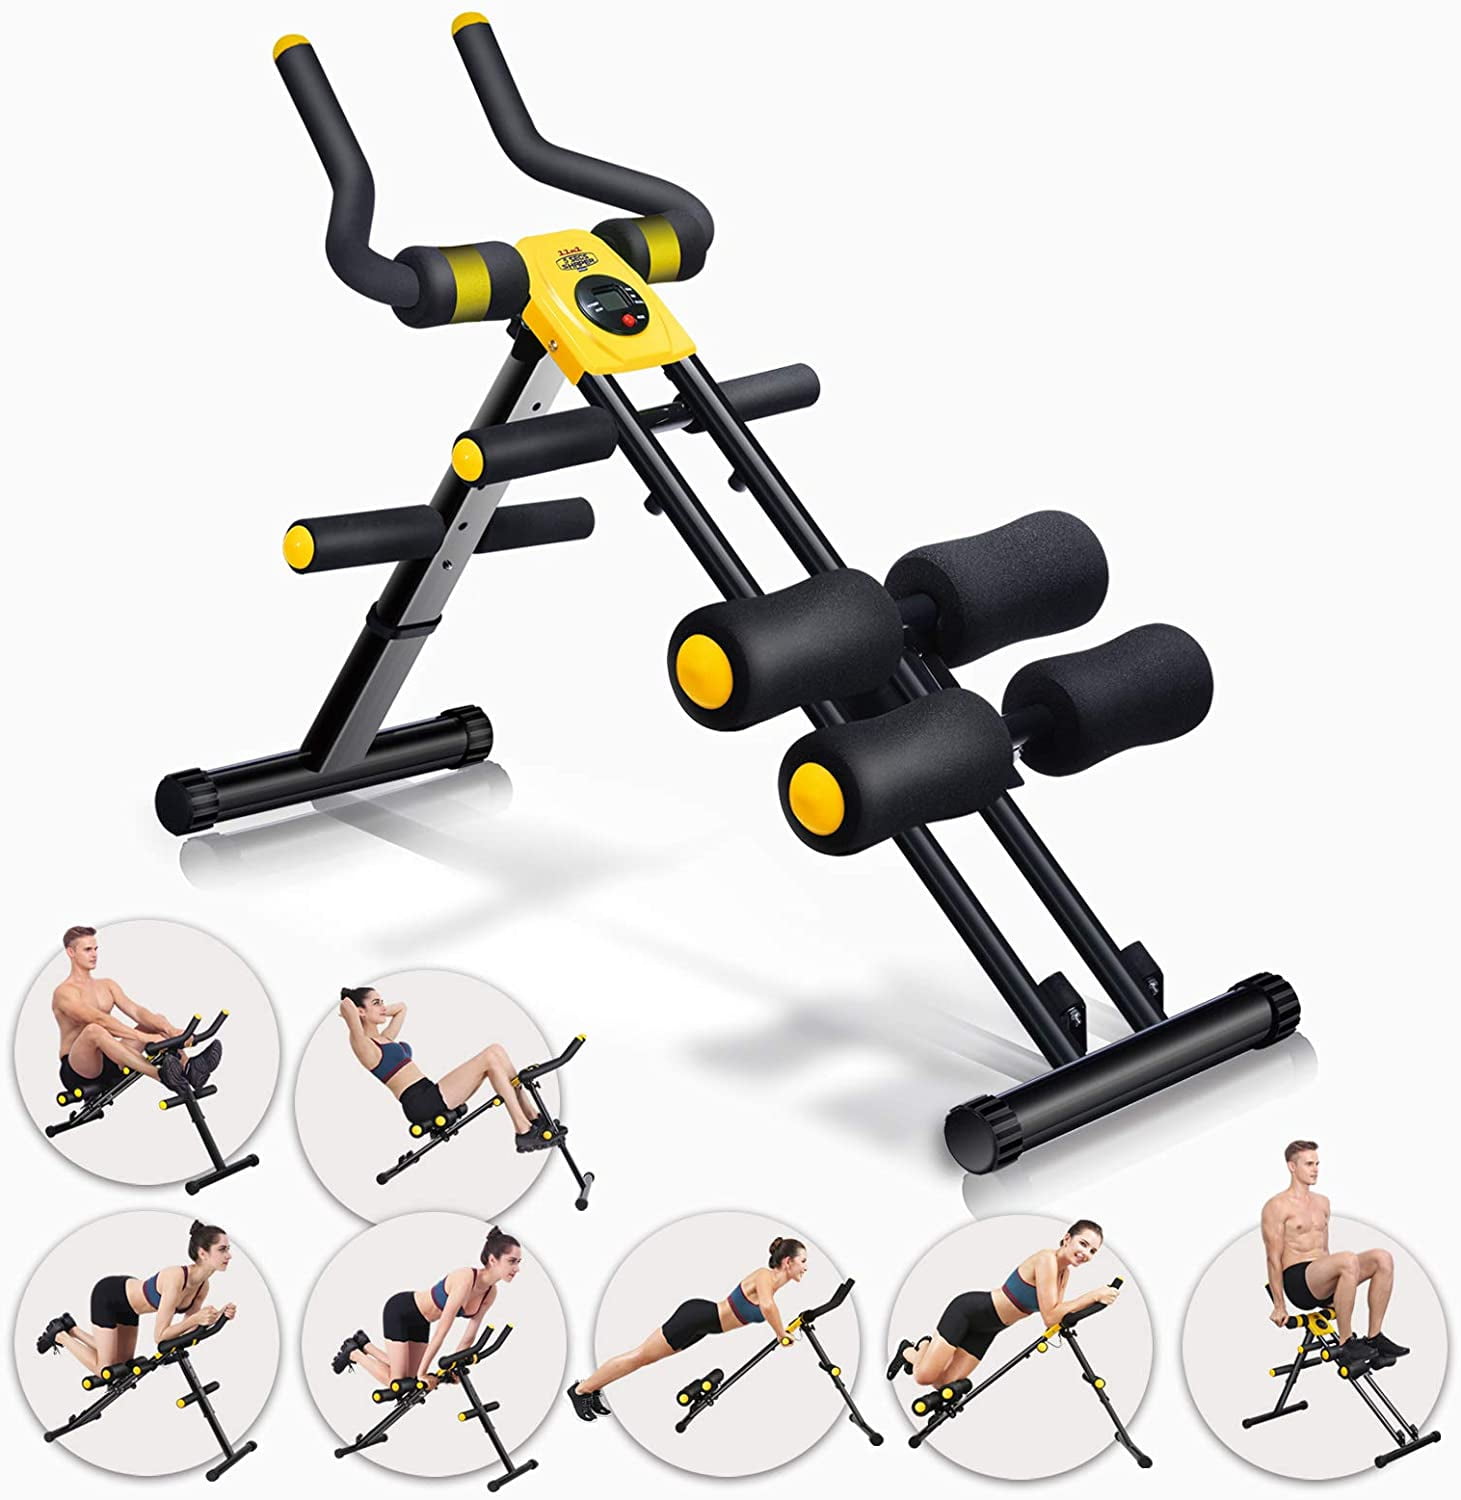 Smart Body ABS Trainer GB-Range Wonder Abs Core Toning Machine 6 Packs Home Gym Fitness Training Exercise Equipment 